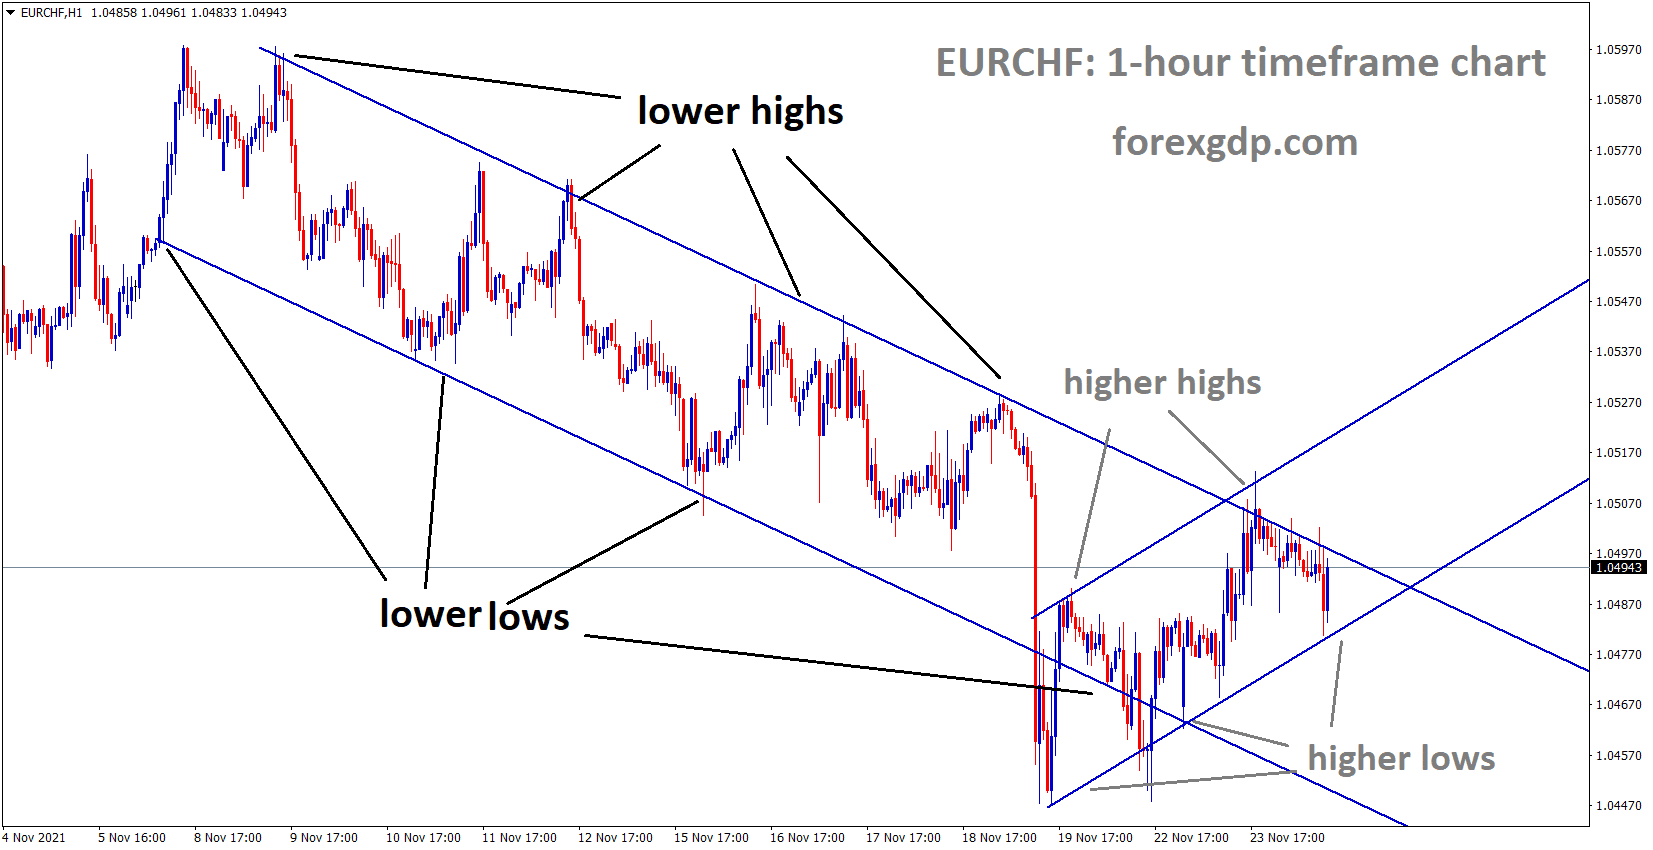 EURCHF is moving in the major Descending channel and the market has rebounded from the higher low area